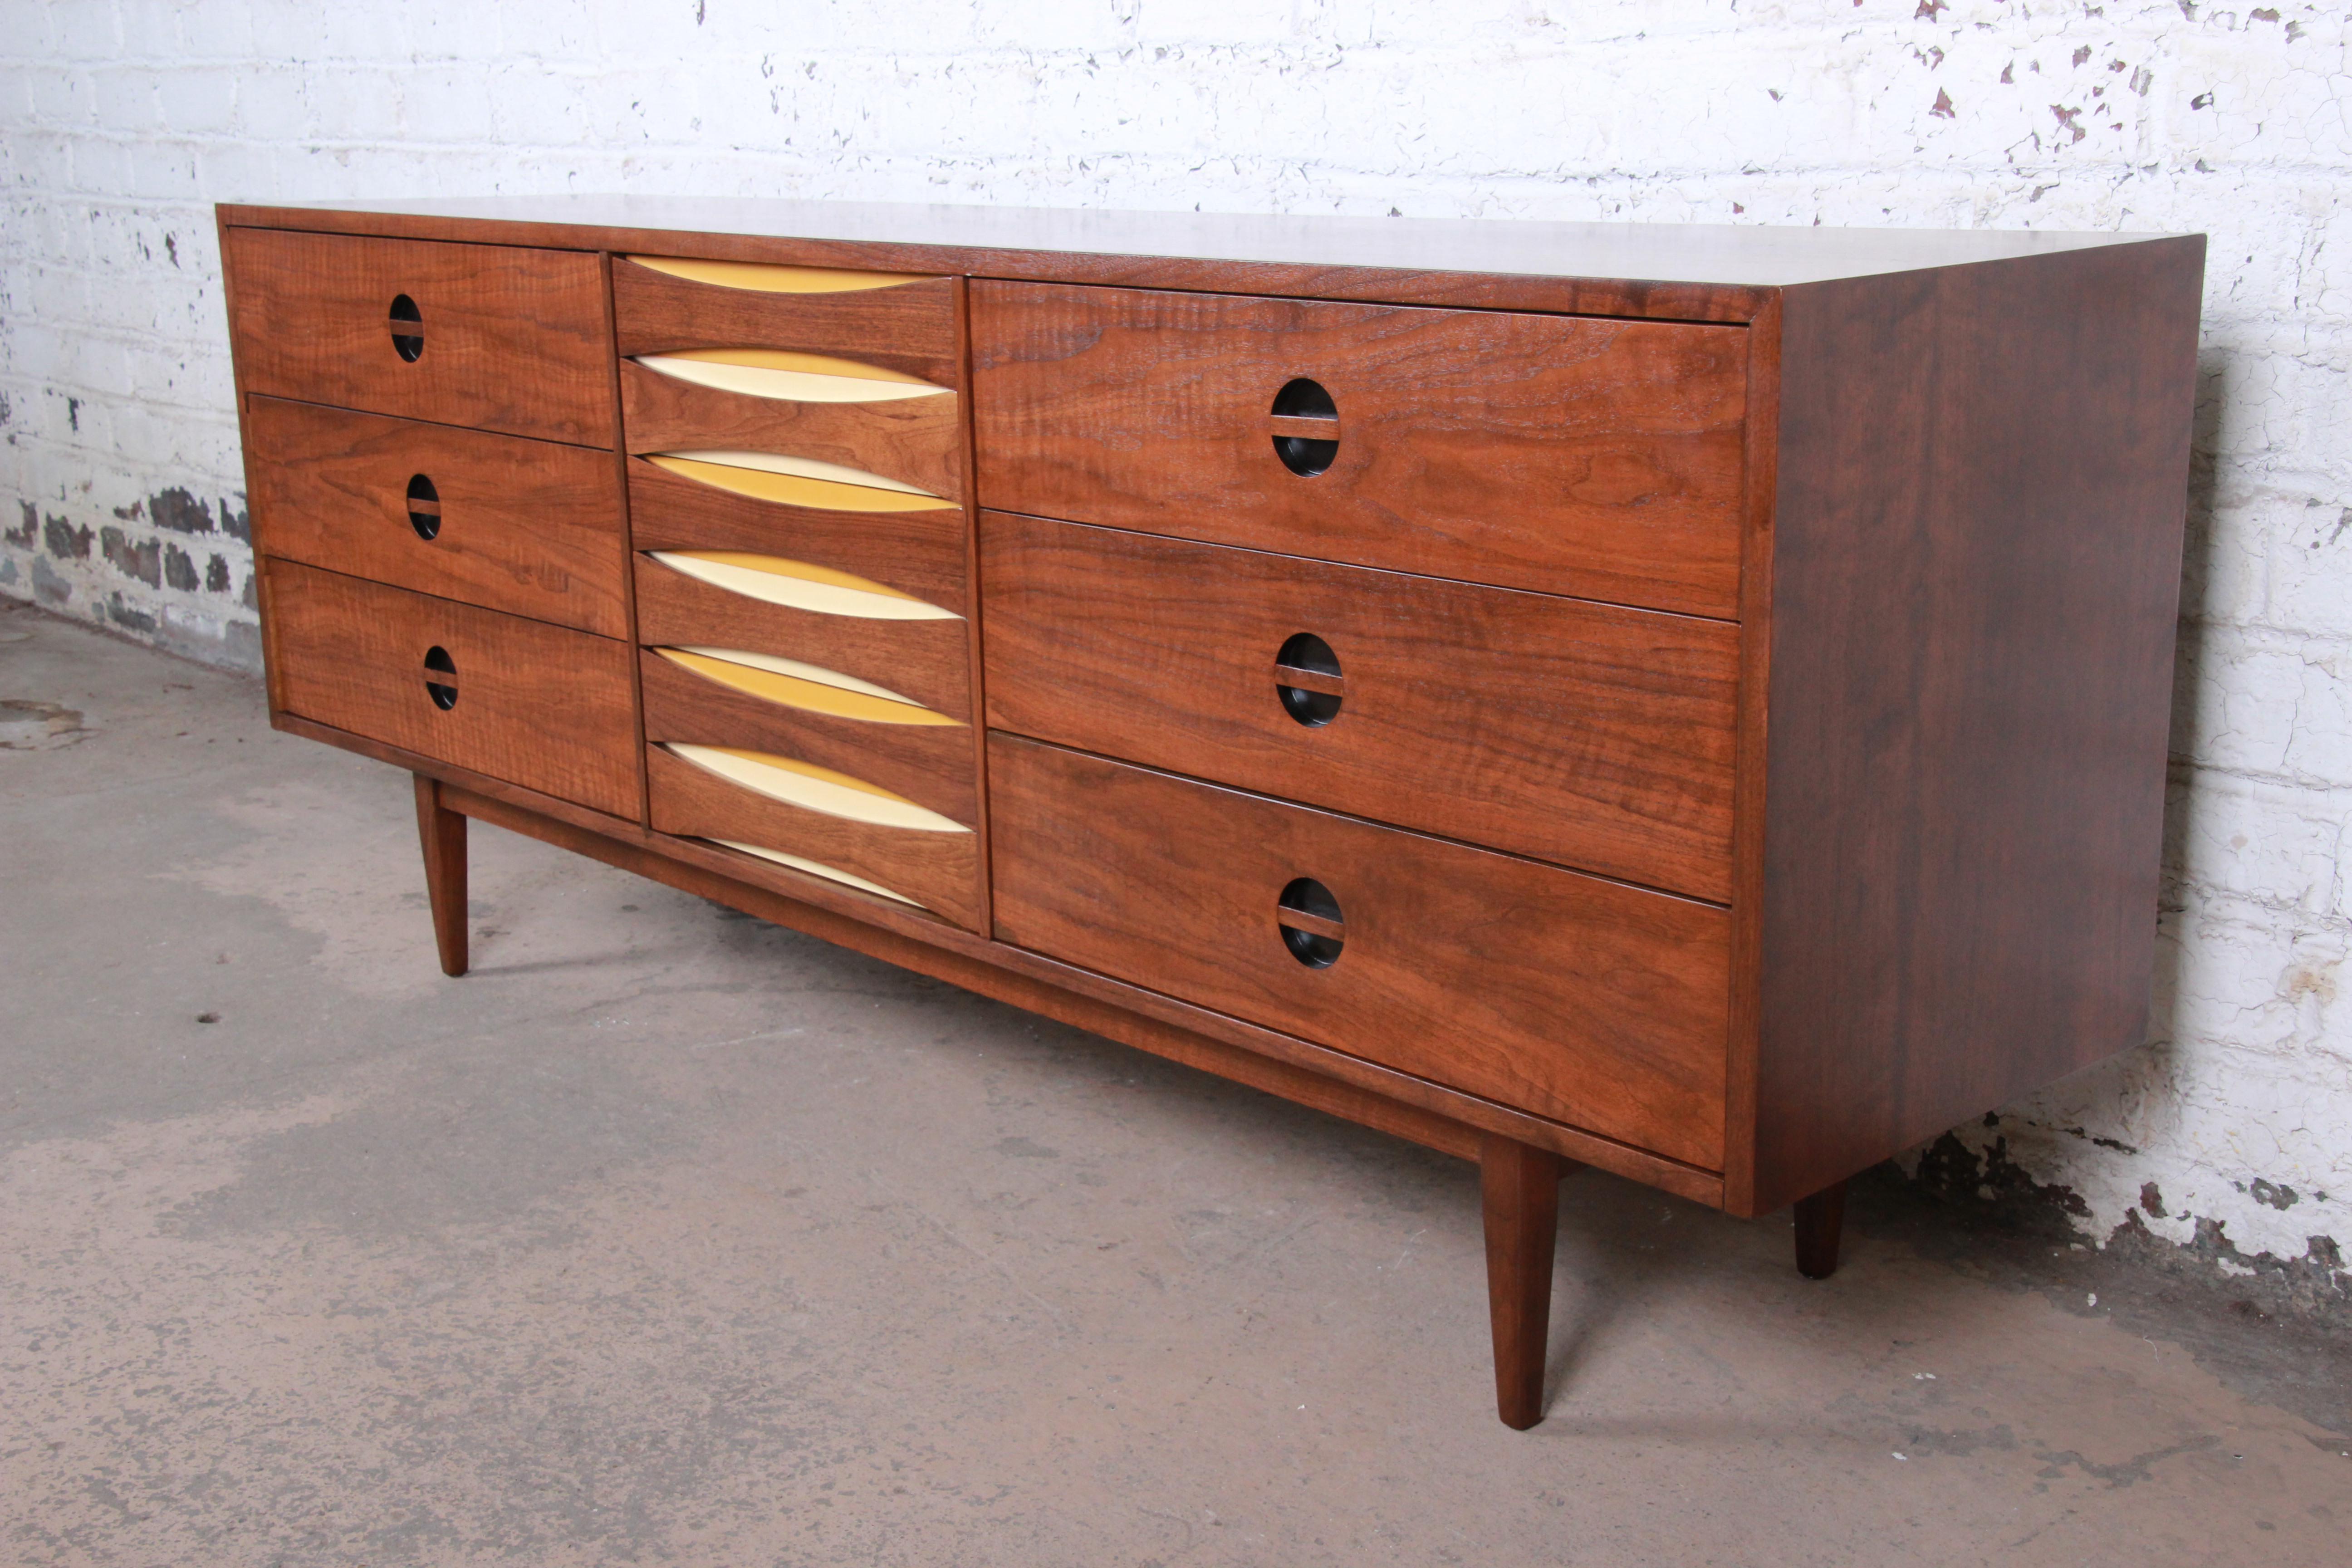 An exceptional Mid-Century Modern Arne Vodder style walnut triple dresser or credenza by West Michigan Furniture Co. The dresser features beautiful walnut wood grain with sculpted recessed drawer pulls. It offers ample storage, with nine deep